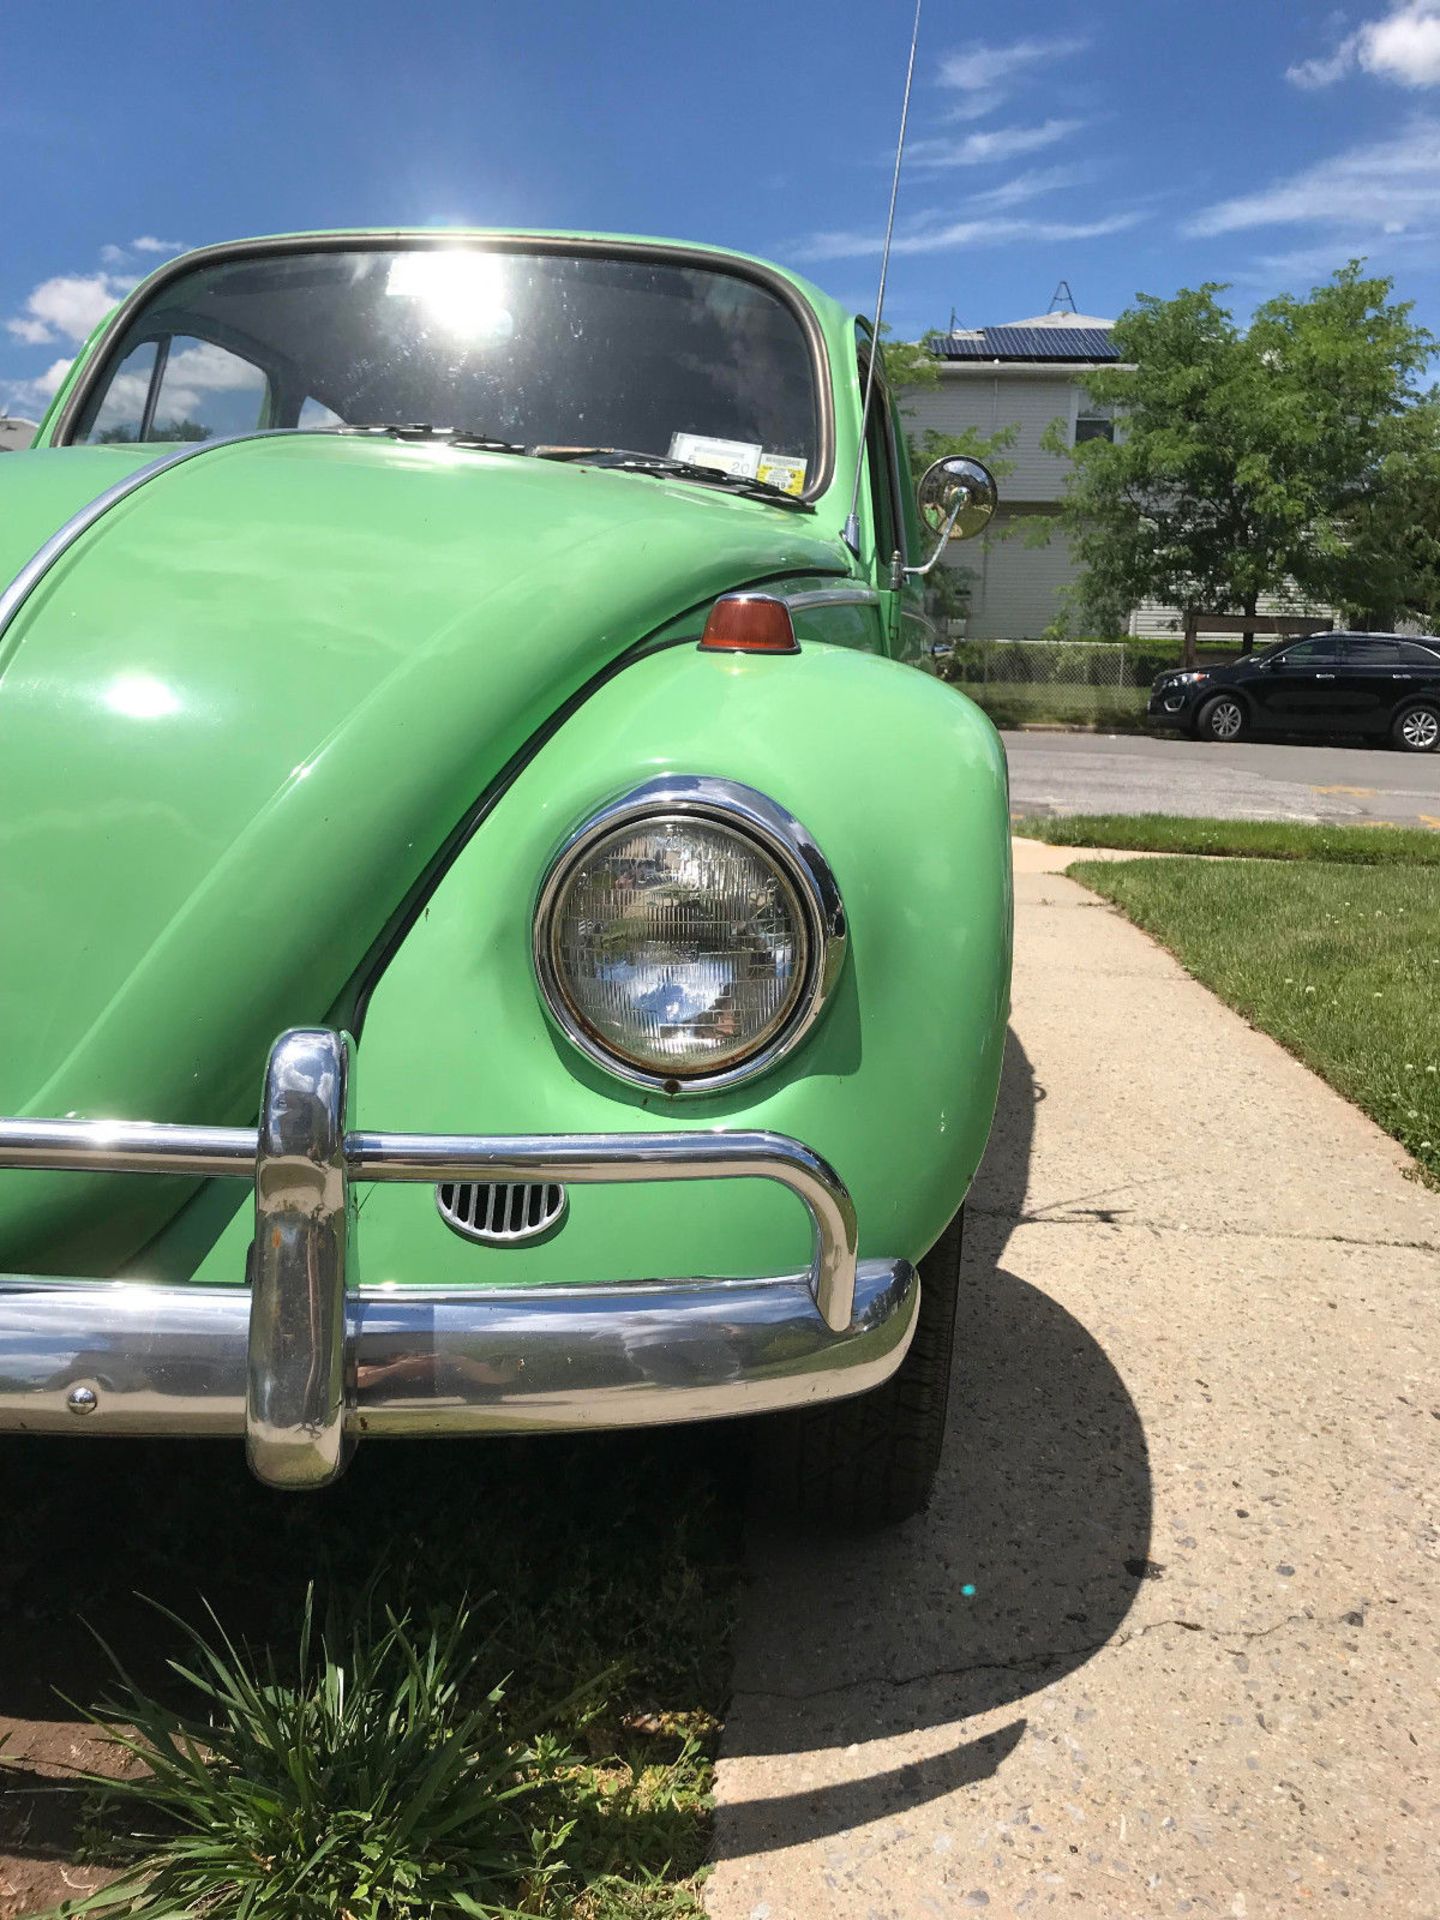 1967 Volkswagen Beetle - Classic, BRAND NEW INTERIOR, VERY COLLECTIBLE, BEATLES GREEN, LOCATION NY - Image 4 of 10